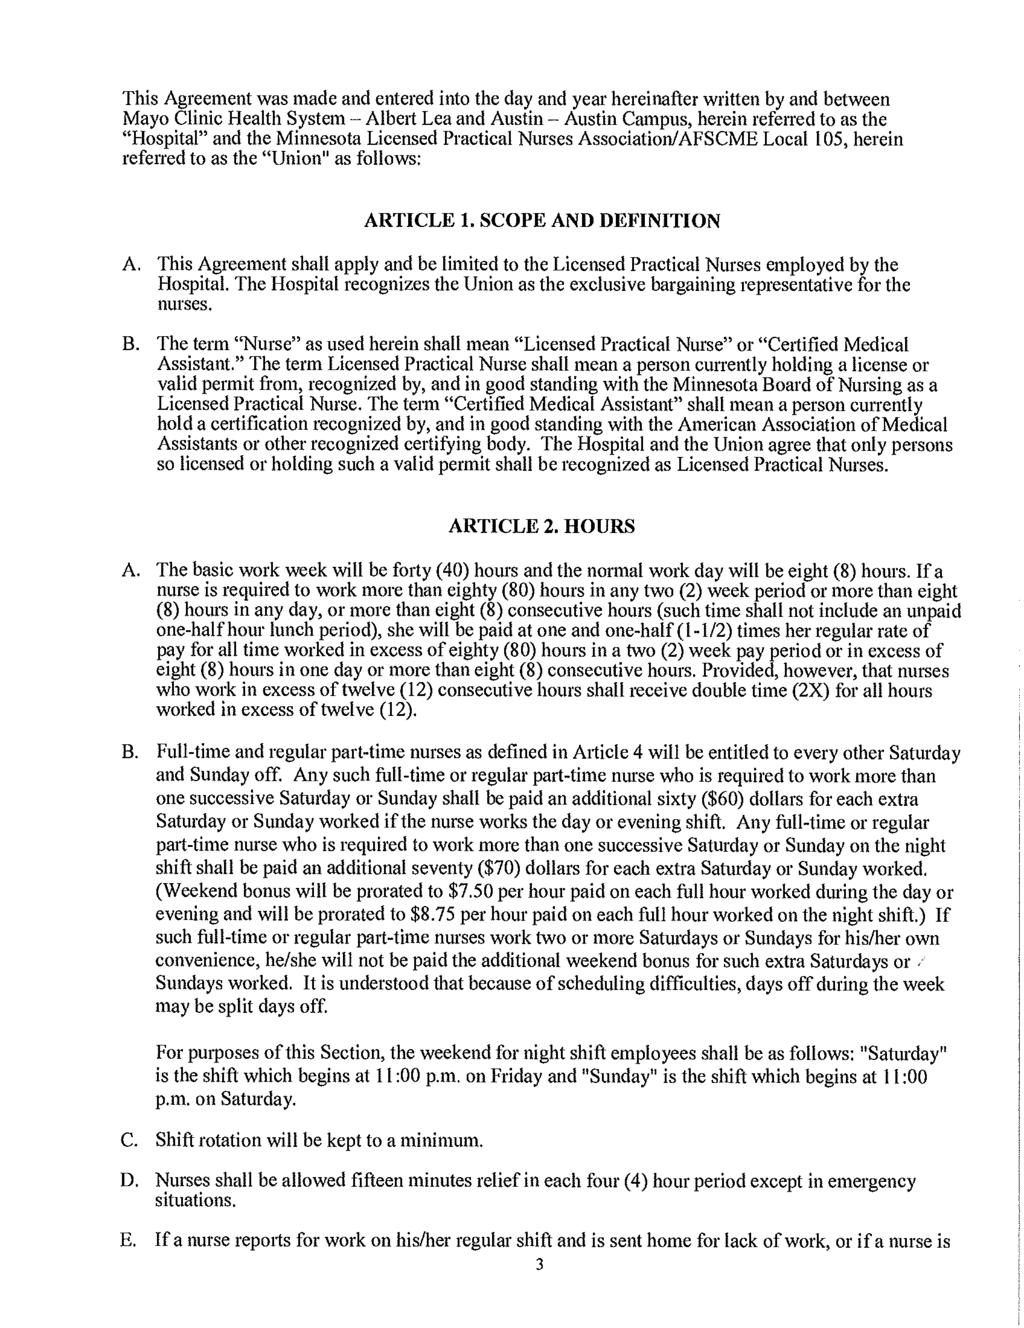 This Agreement was made and entered into the day and year hereinafter written by and between Mayo Clinic Health System Albert Lea and Austin Austin Campus, herein referred to as the "Hospital" and